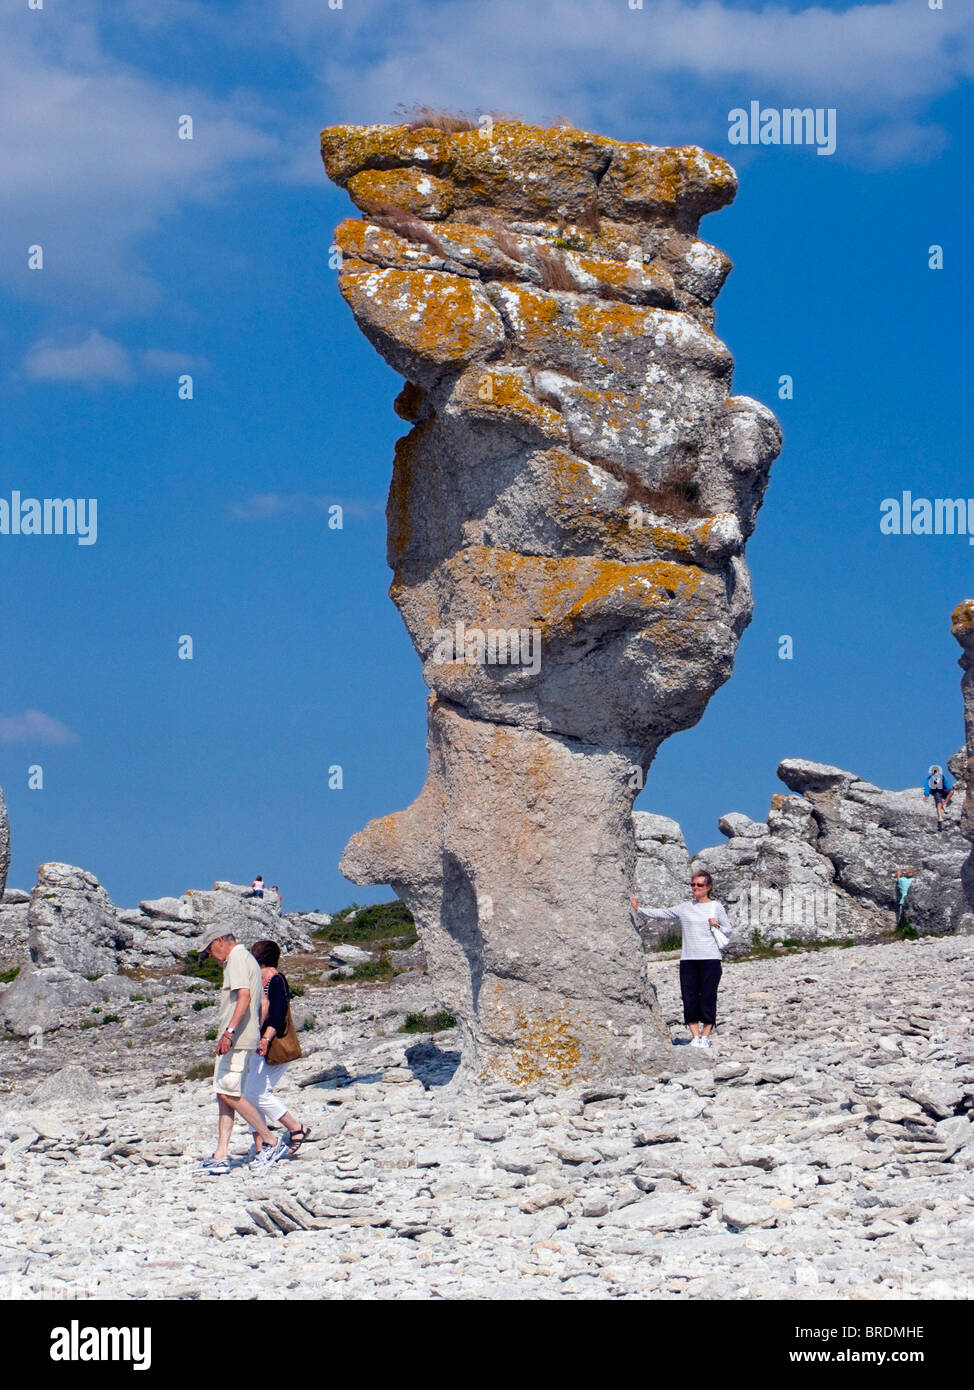 Tourists by the seastacks at Langhammar, eroded remains of millions of years of old coral reefs. Stock Photo